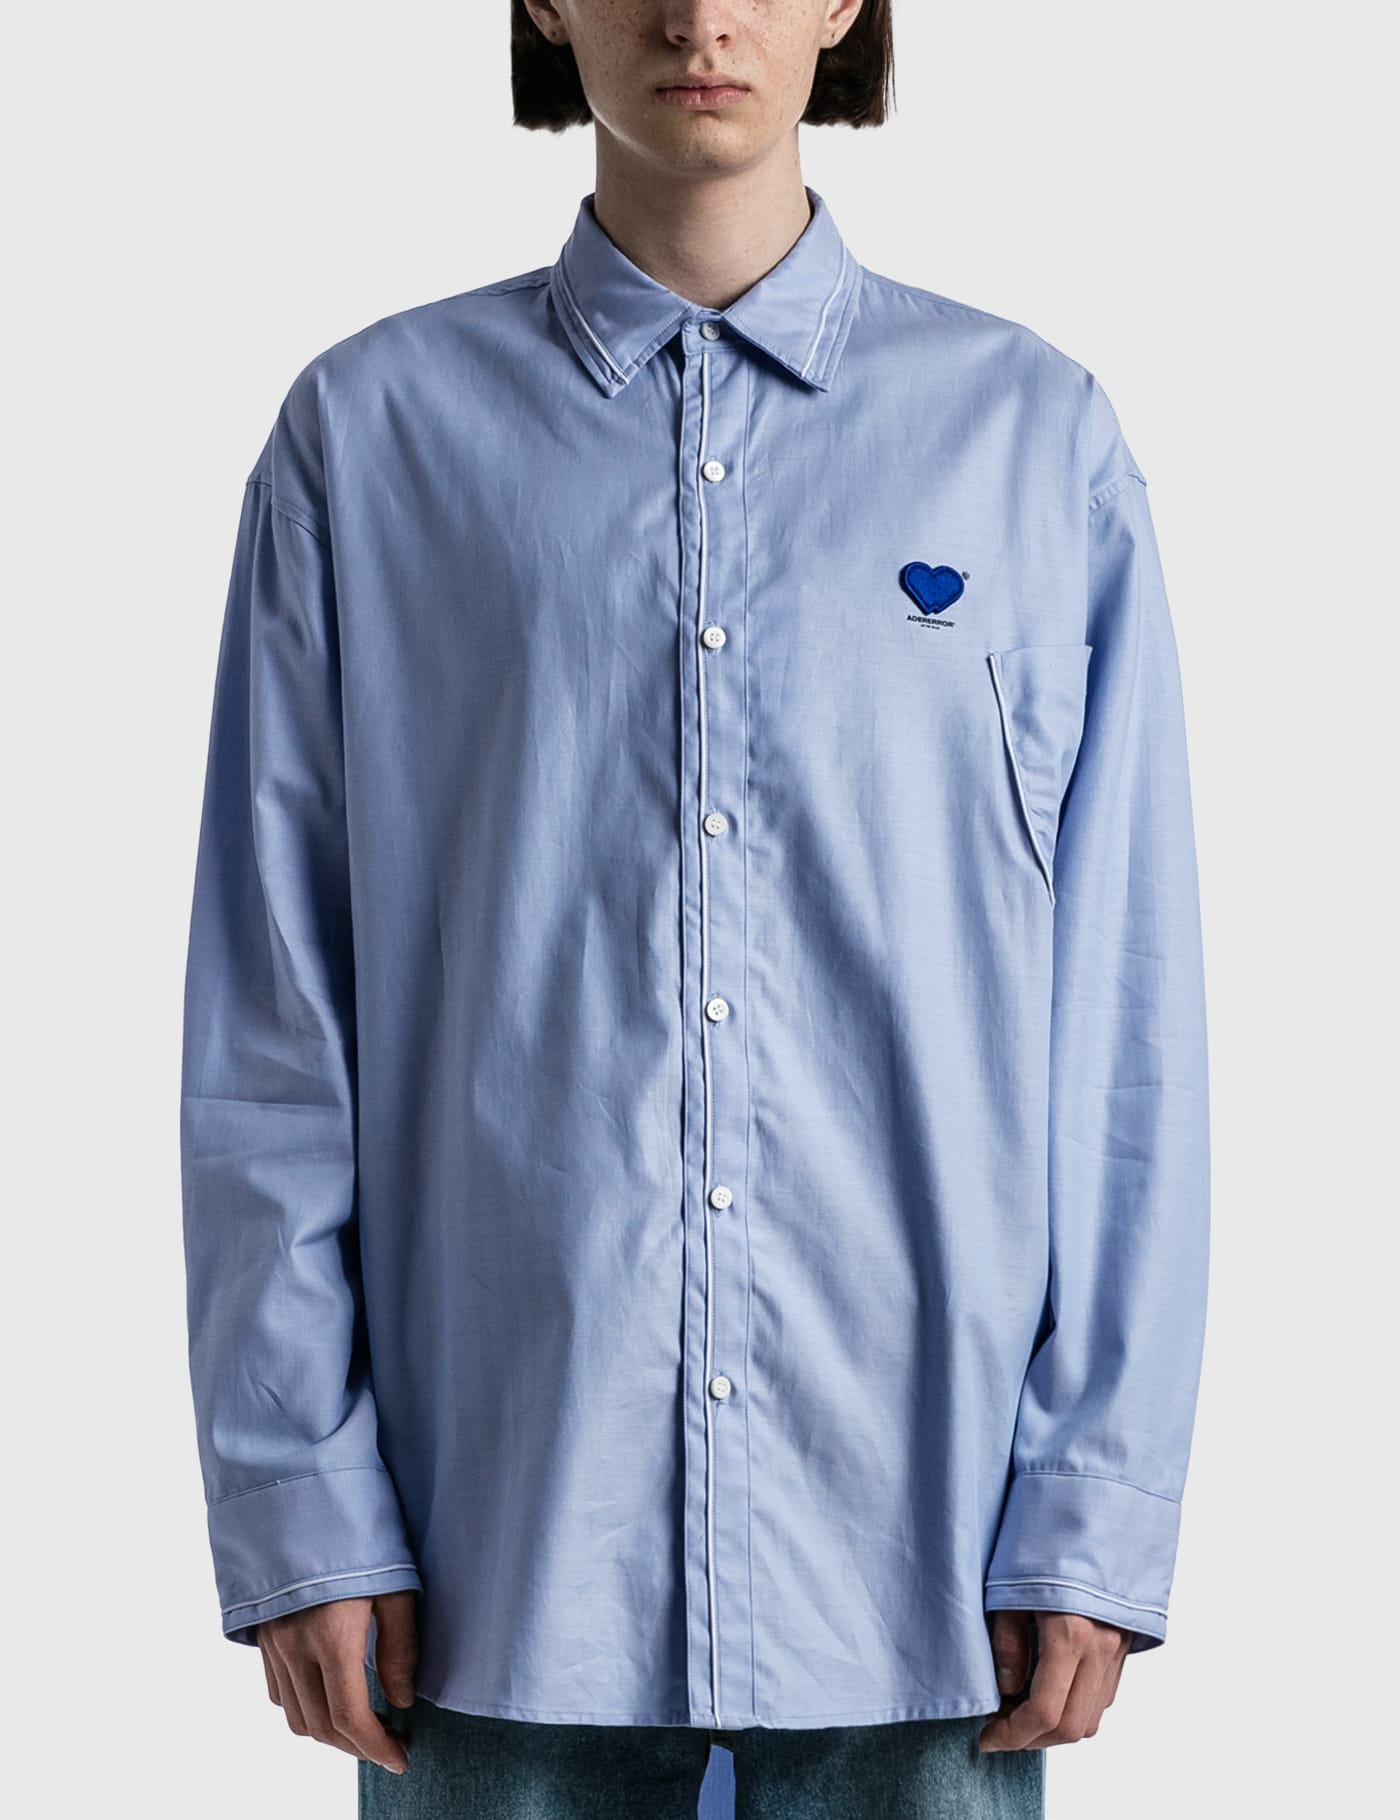 Ader Error - Twin Heart Logo Shirt | HBX - Globally Curated Fashion and  Lifestyle by Hypebeast